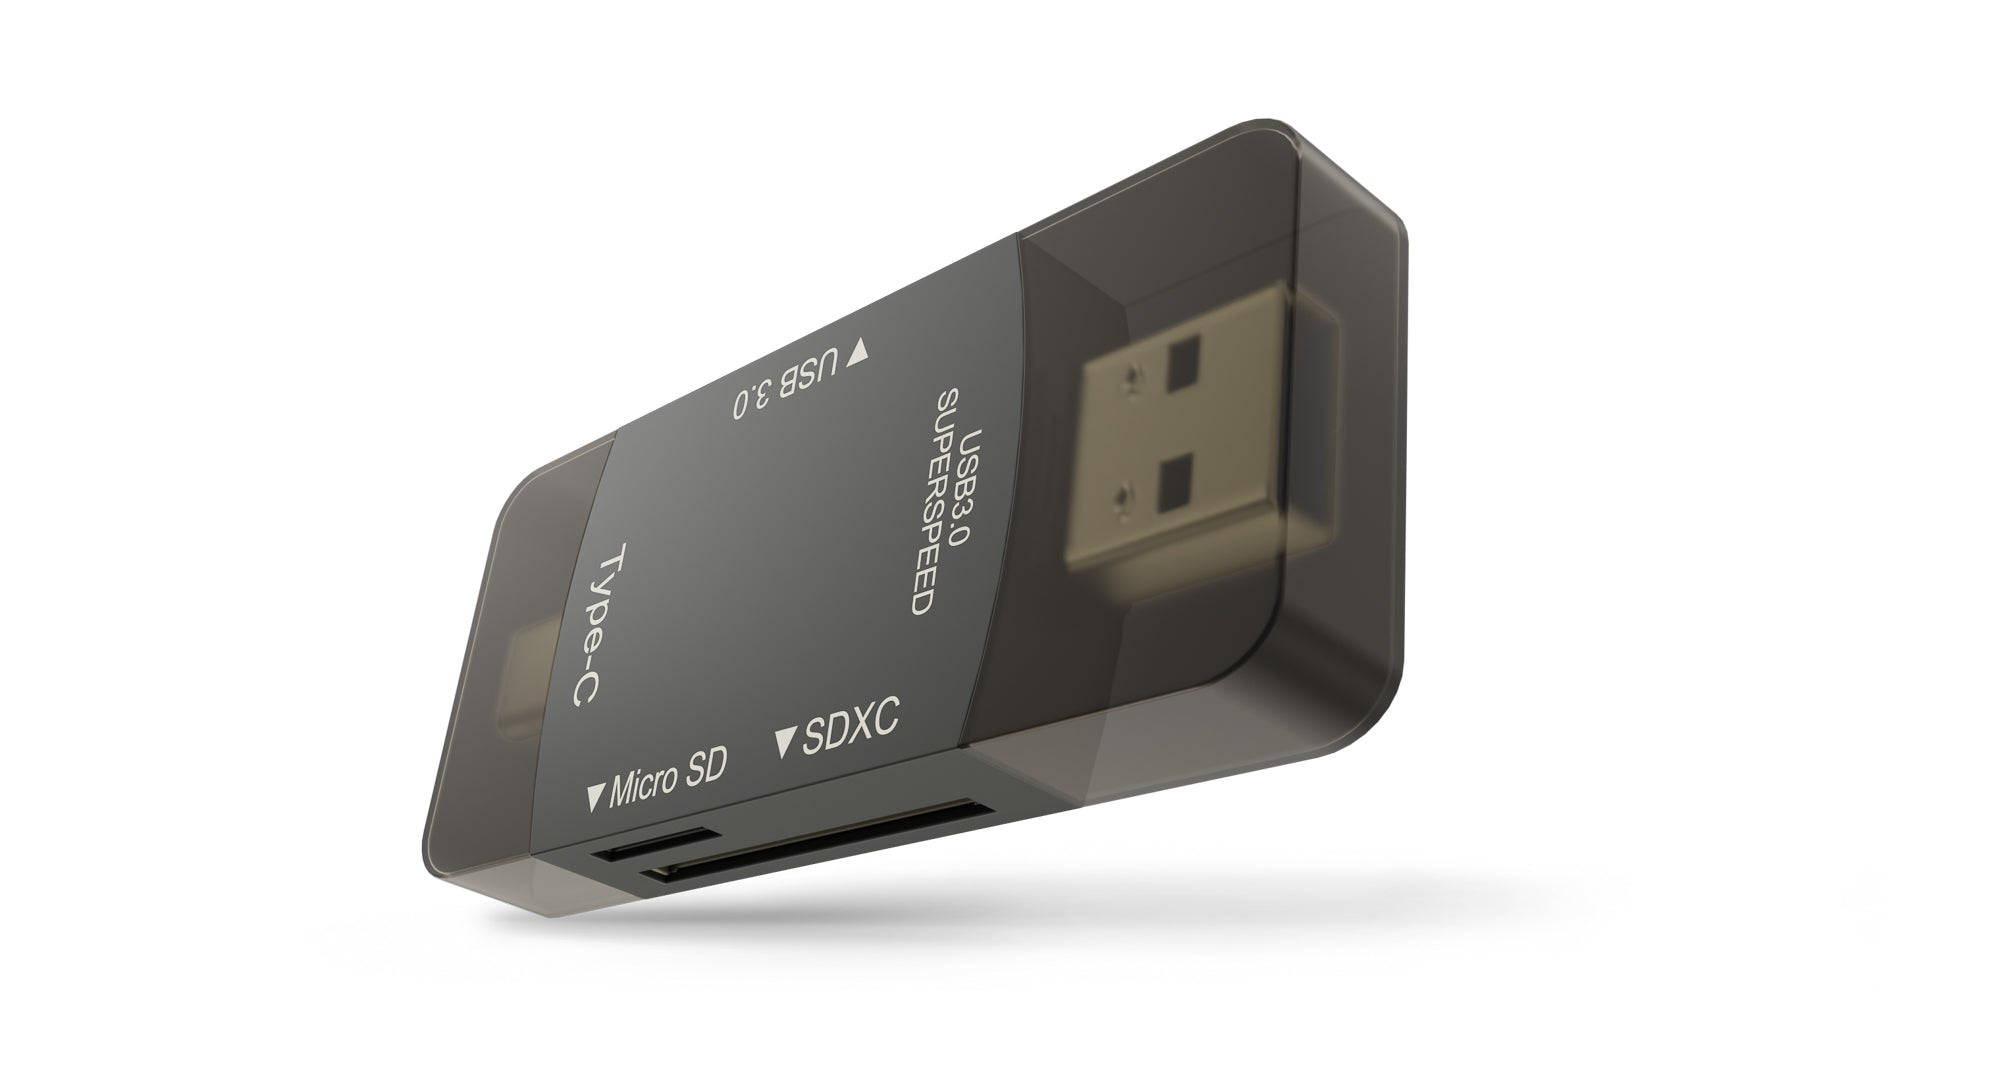 Newell USB "On The Go" Hub 3in1 - USB-C / USB-A Hub and USB-A pass-through MicroSD and SD cardreaders for phones/tablets or laptop - Graphite Colour